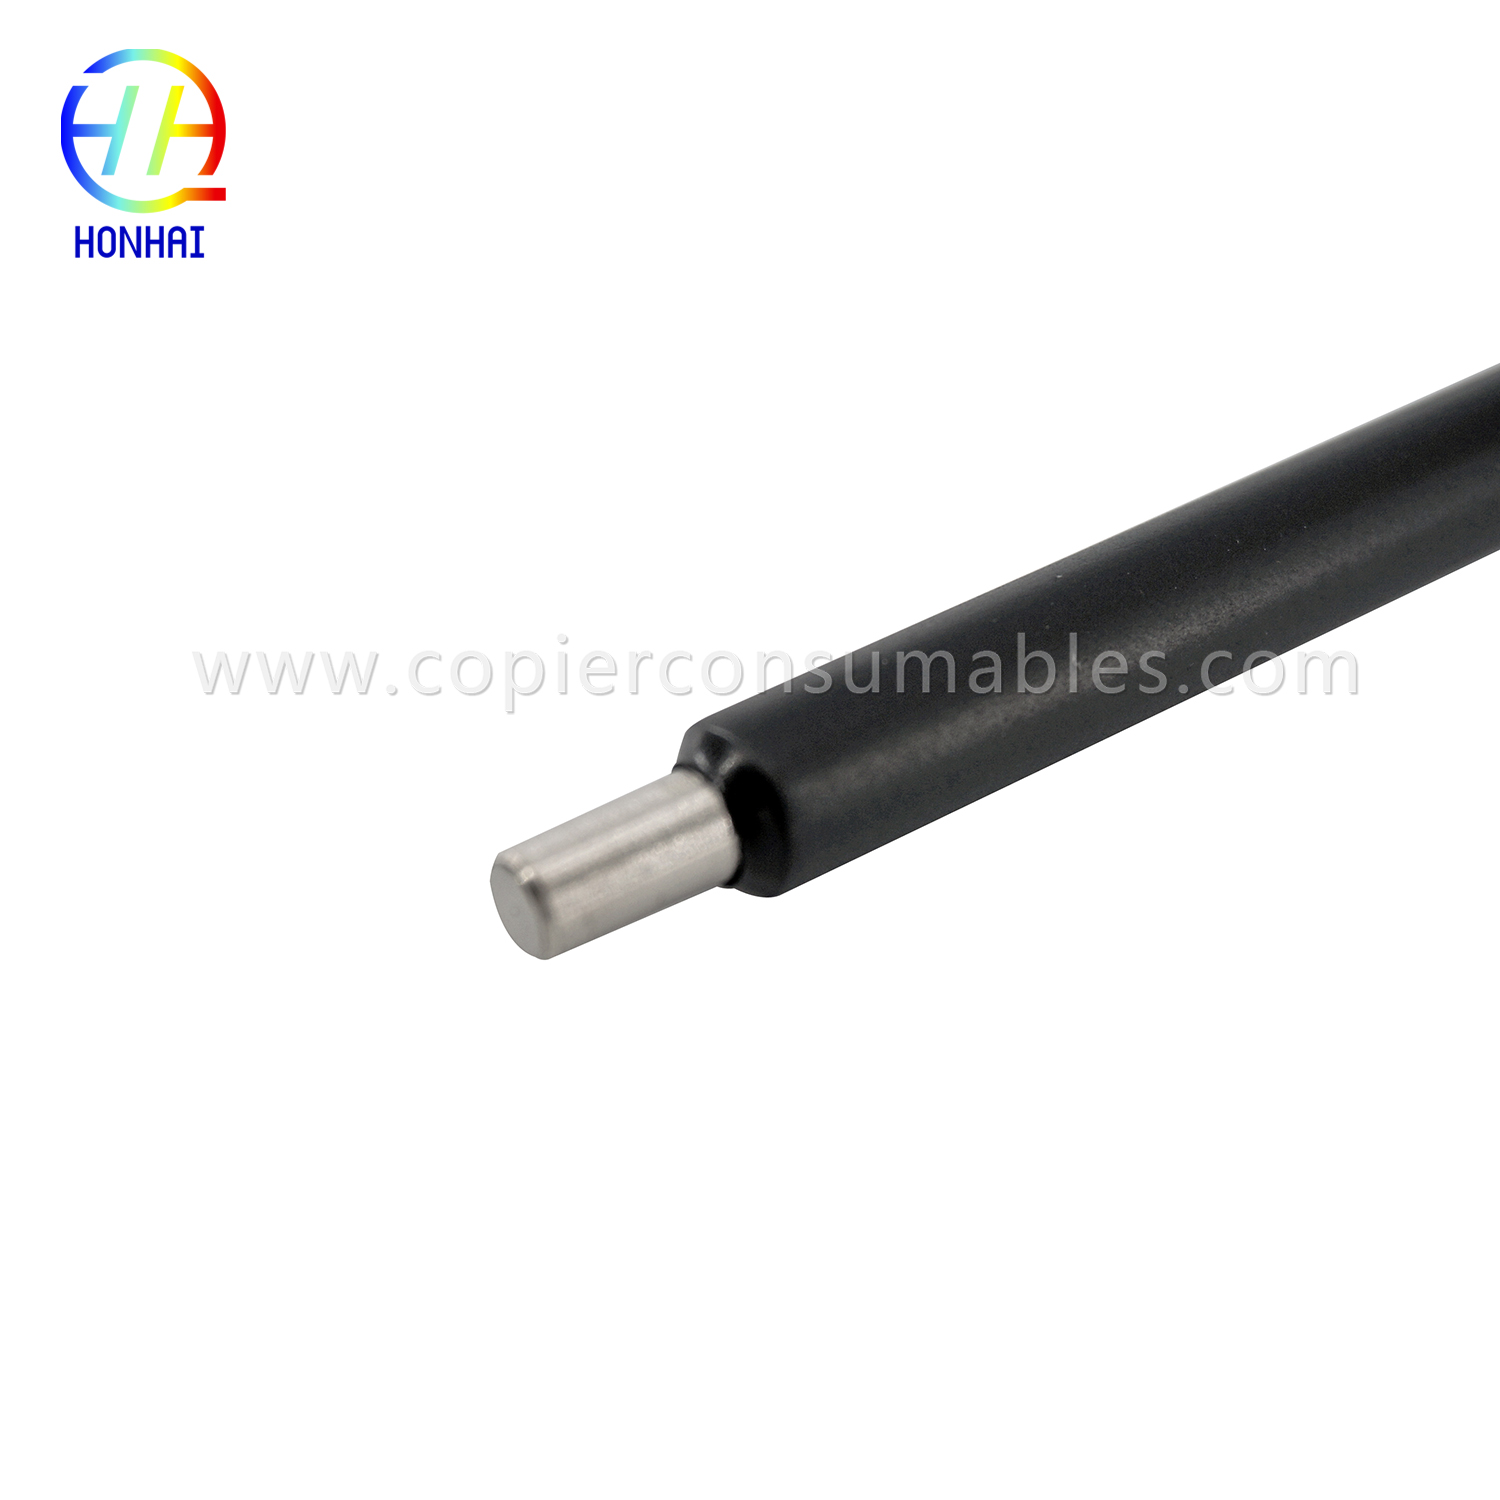 Primary Charge Roller For HP 1215 1515 1510 (11) 拷贝